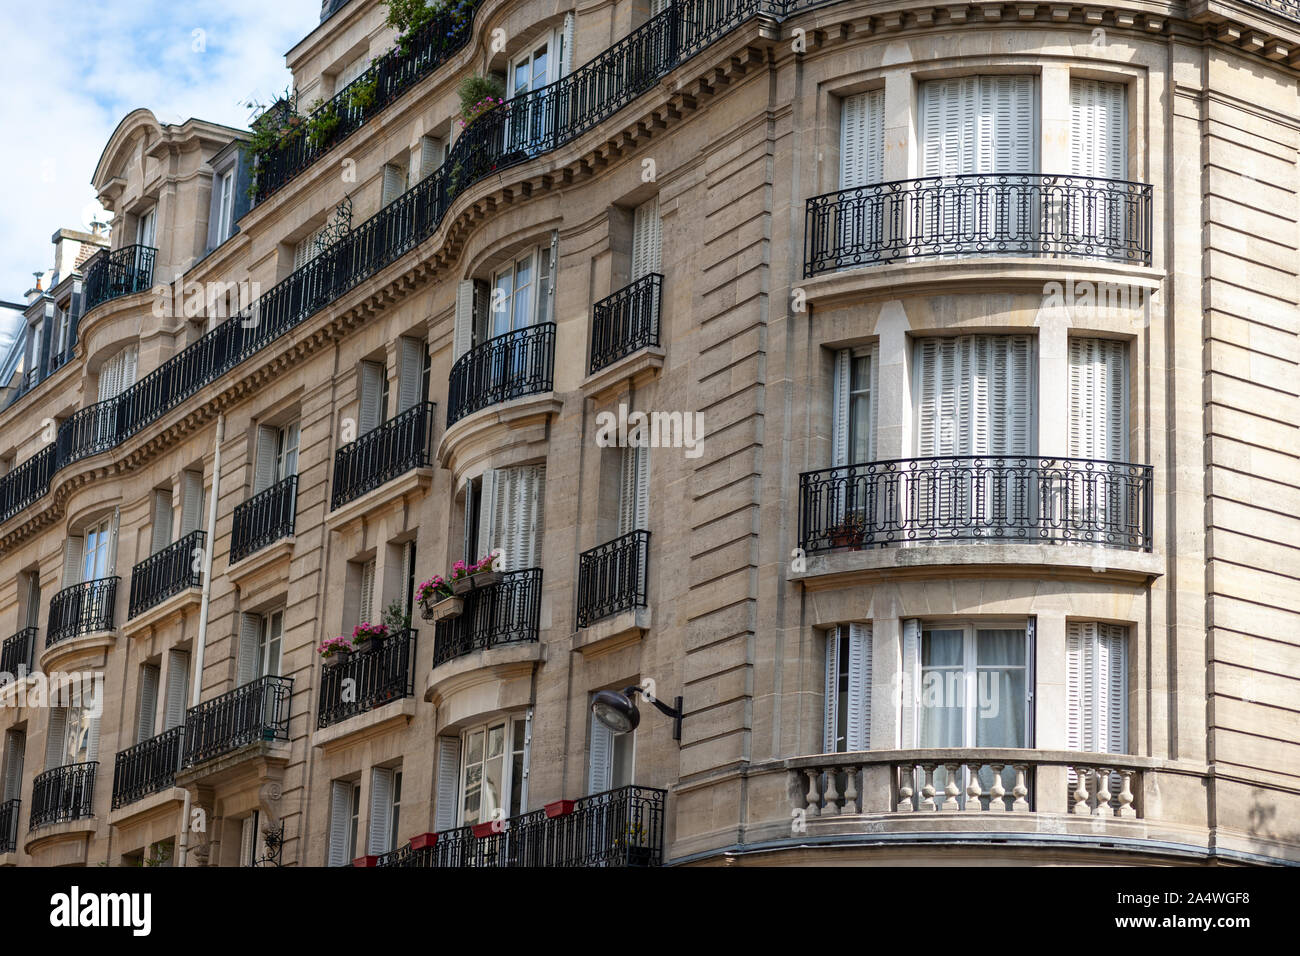 Street scenes in the old districts in Paris, France on August 5, 2019. Stock Photo